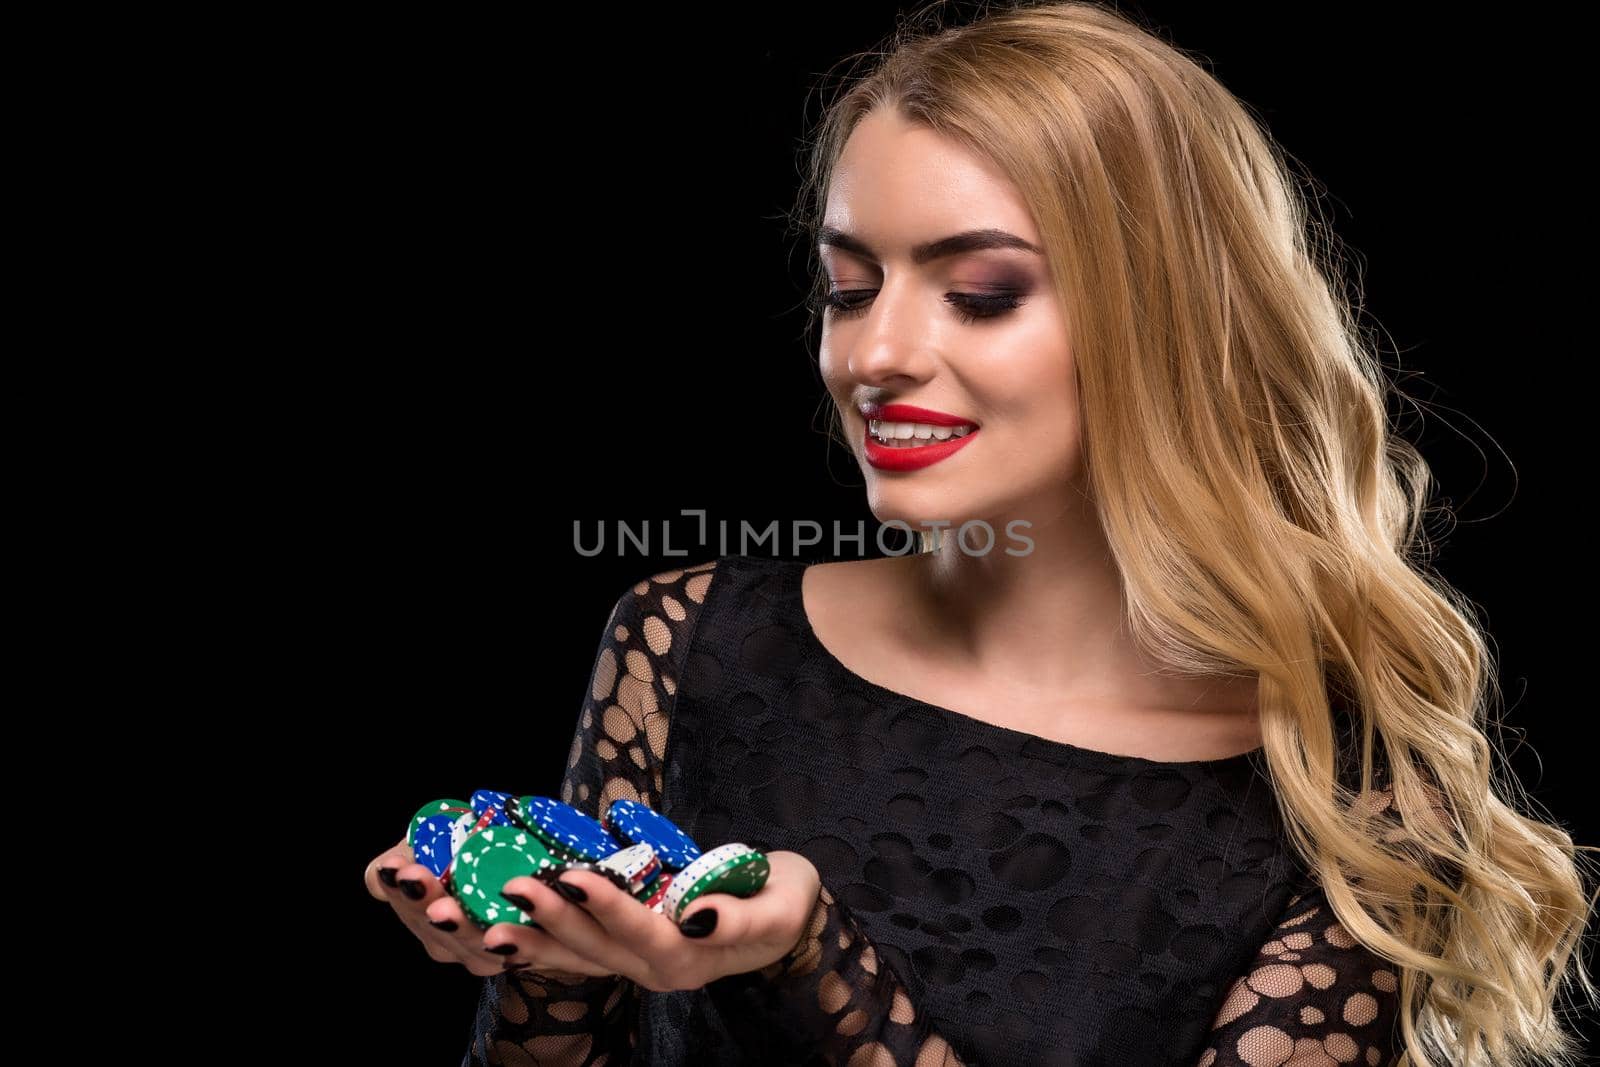 Elegant blonde in a black dress, casino player holding a handful of chips on black background. Poker. Casino. Roulette Blackjack Spin. Caucasian young woman looking at the chips emotions